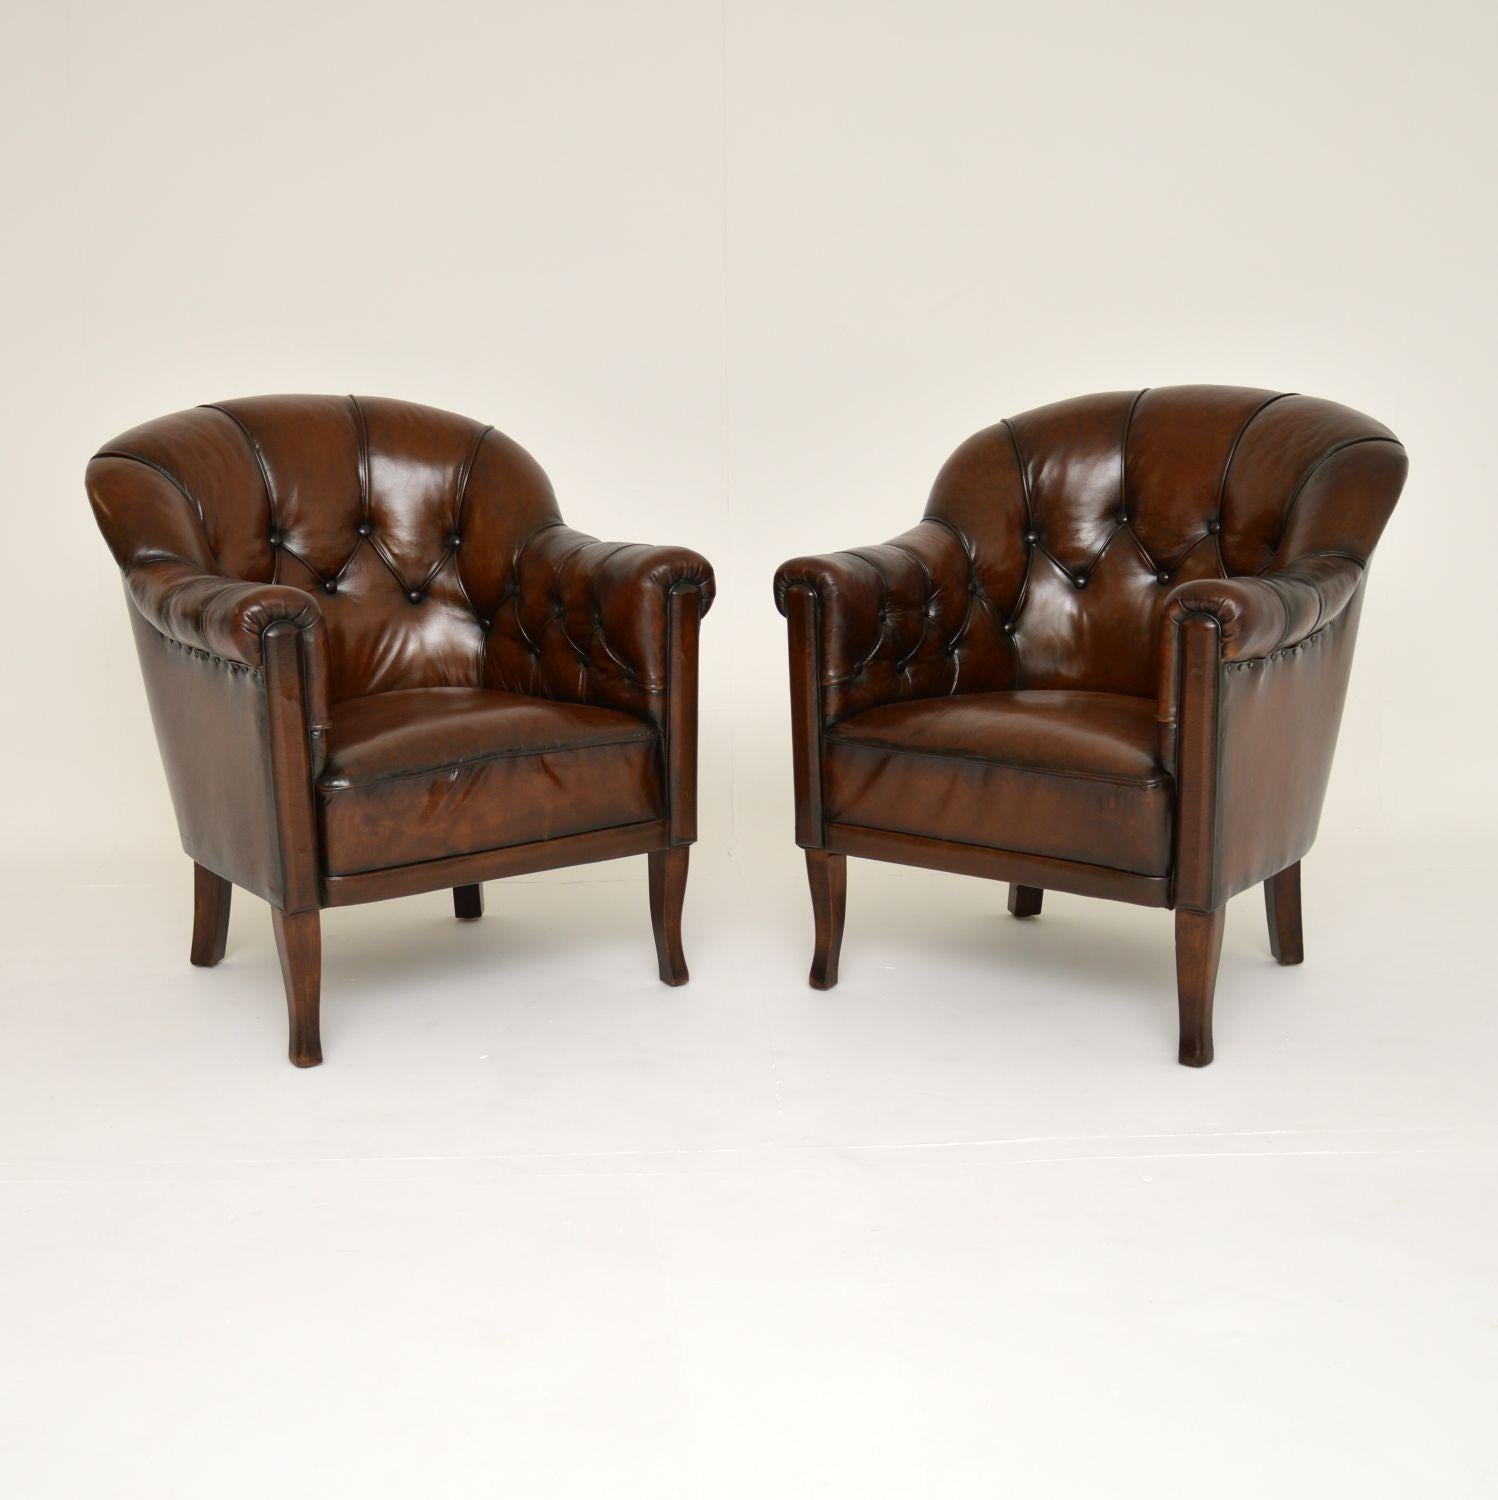 A gorgeous pair of antique Swedish leather armchairs. These were recently imported from Sweden, they date from around the 1900-1910 period.

They are beautifully designed and are of amazing quality. These are also extremely comfortable with a